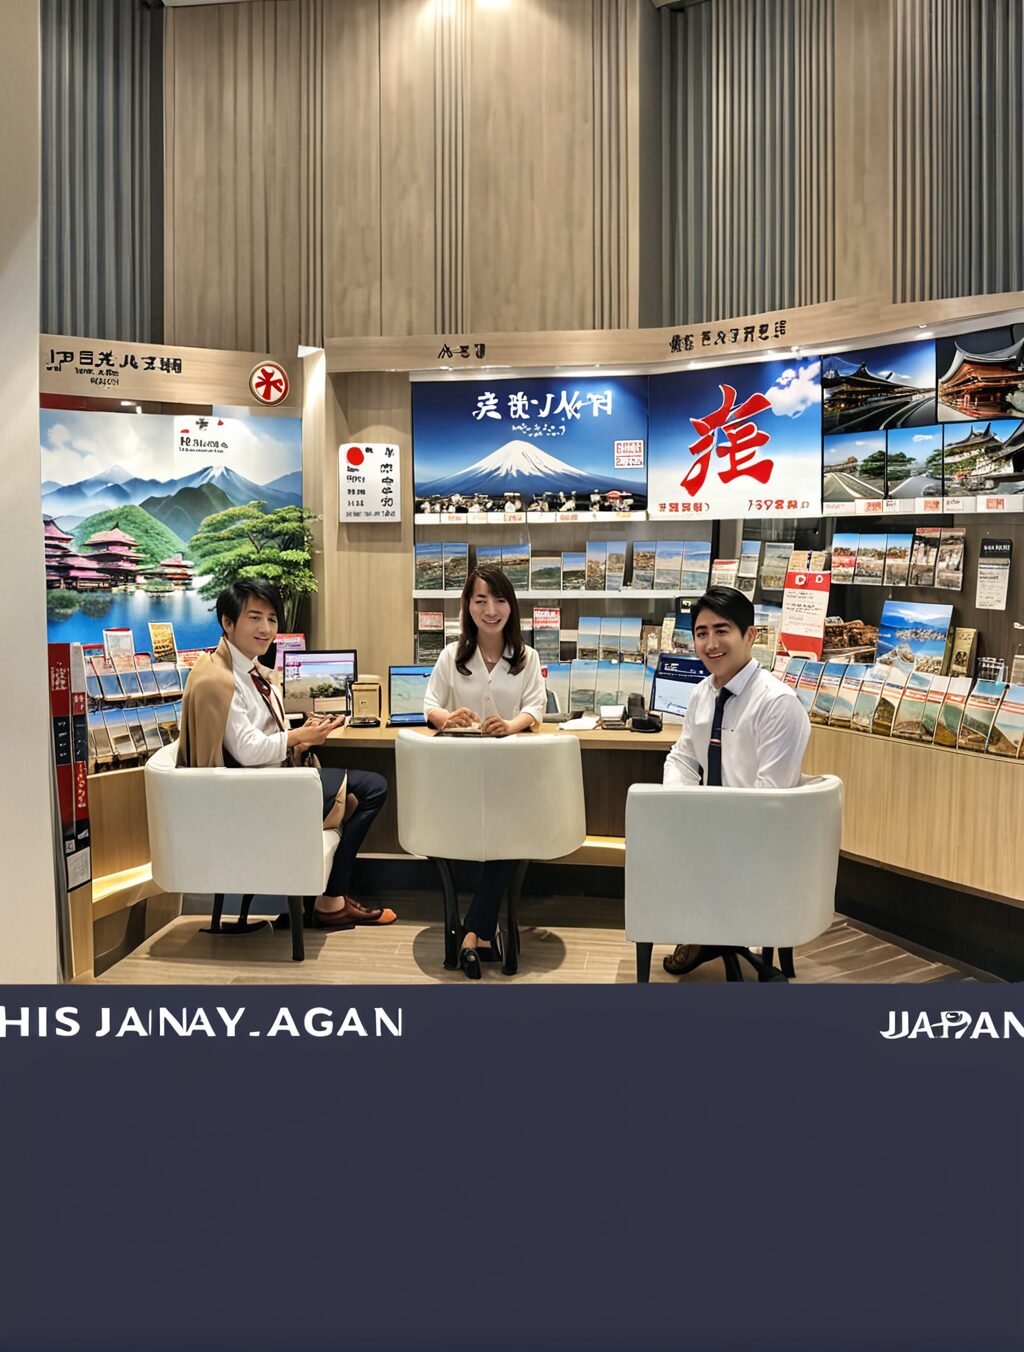 his japan travel agent